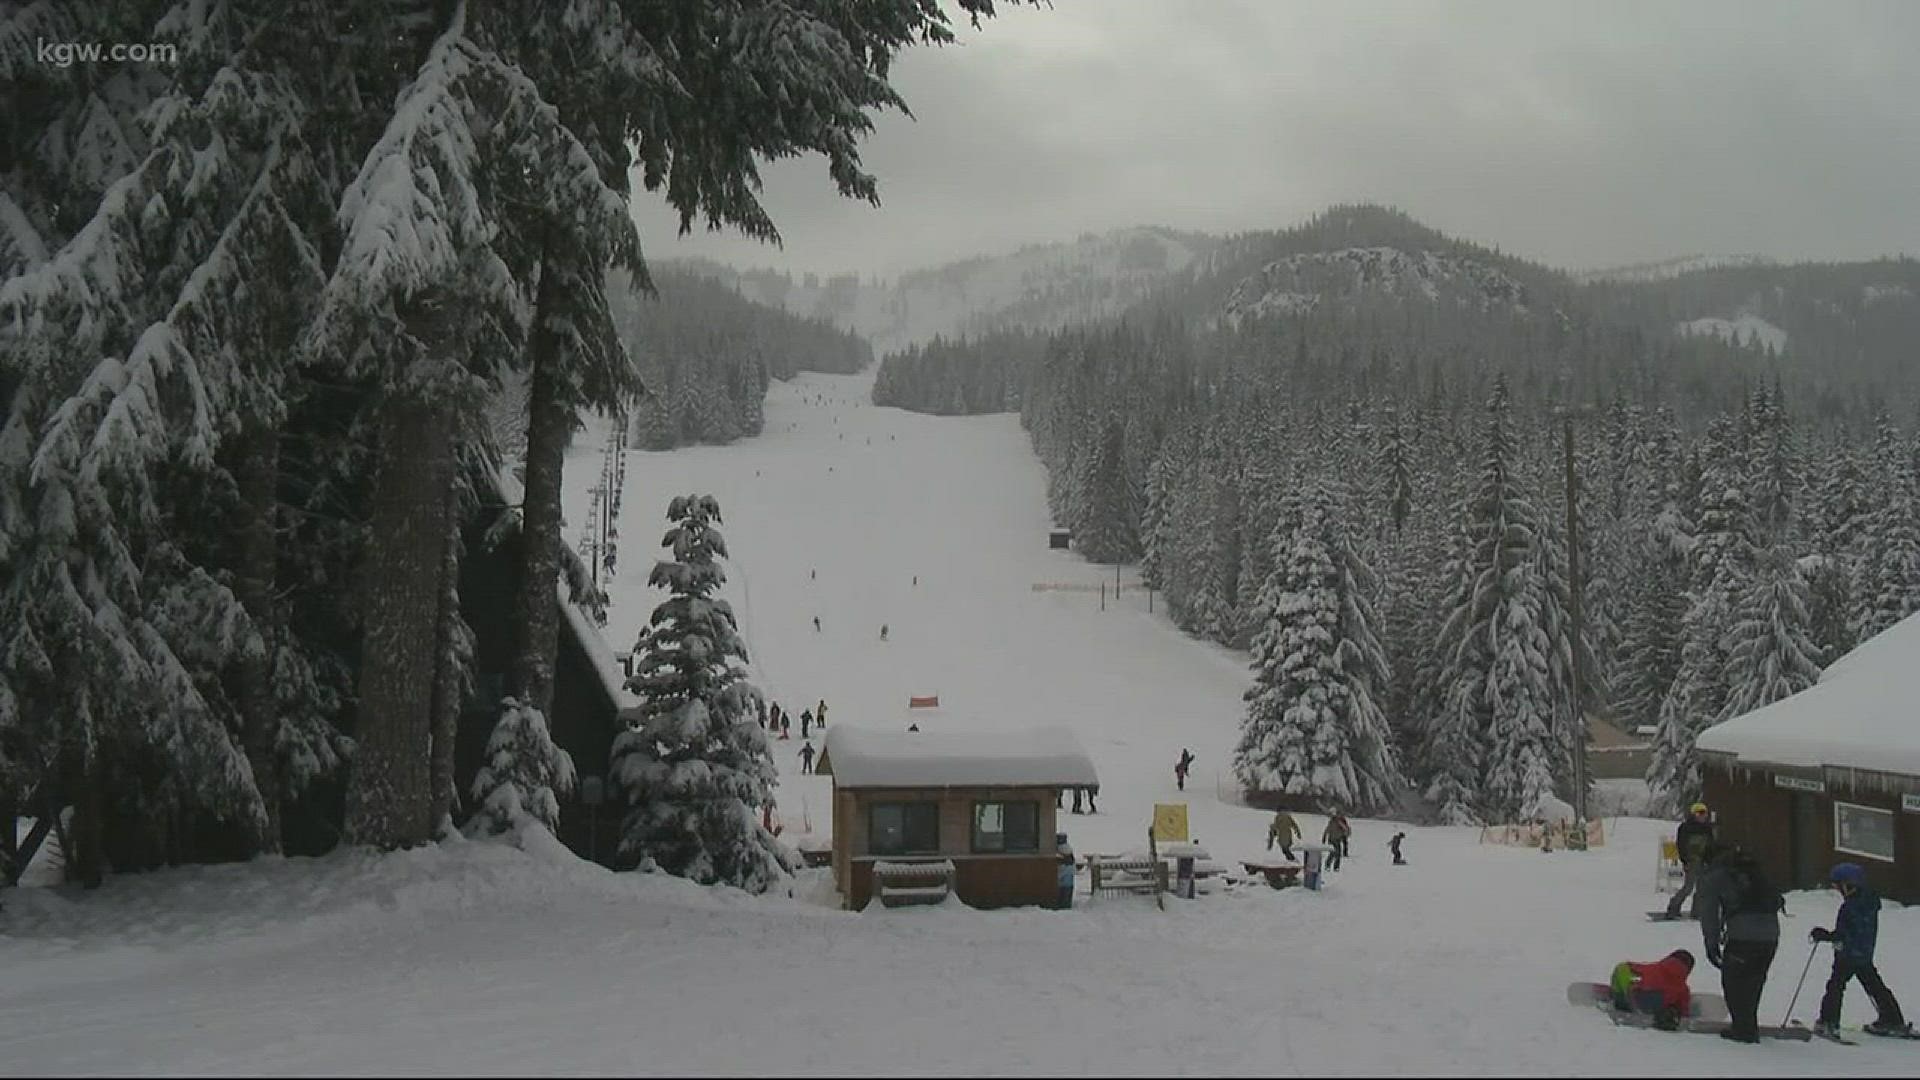 Snow makes for perfect conditions on the mountain.